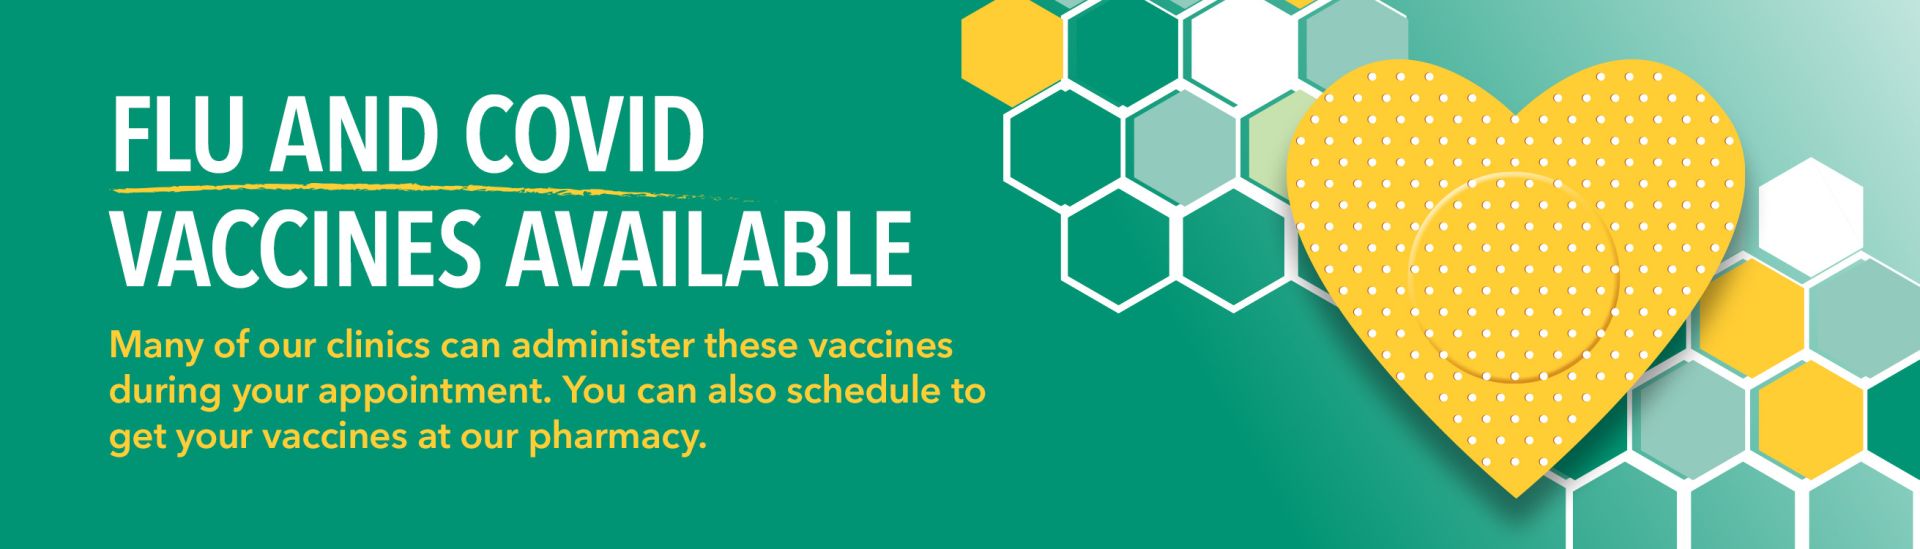 Flu & COVID Vaccines Available 